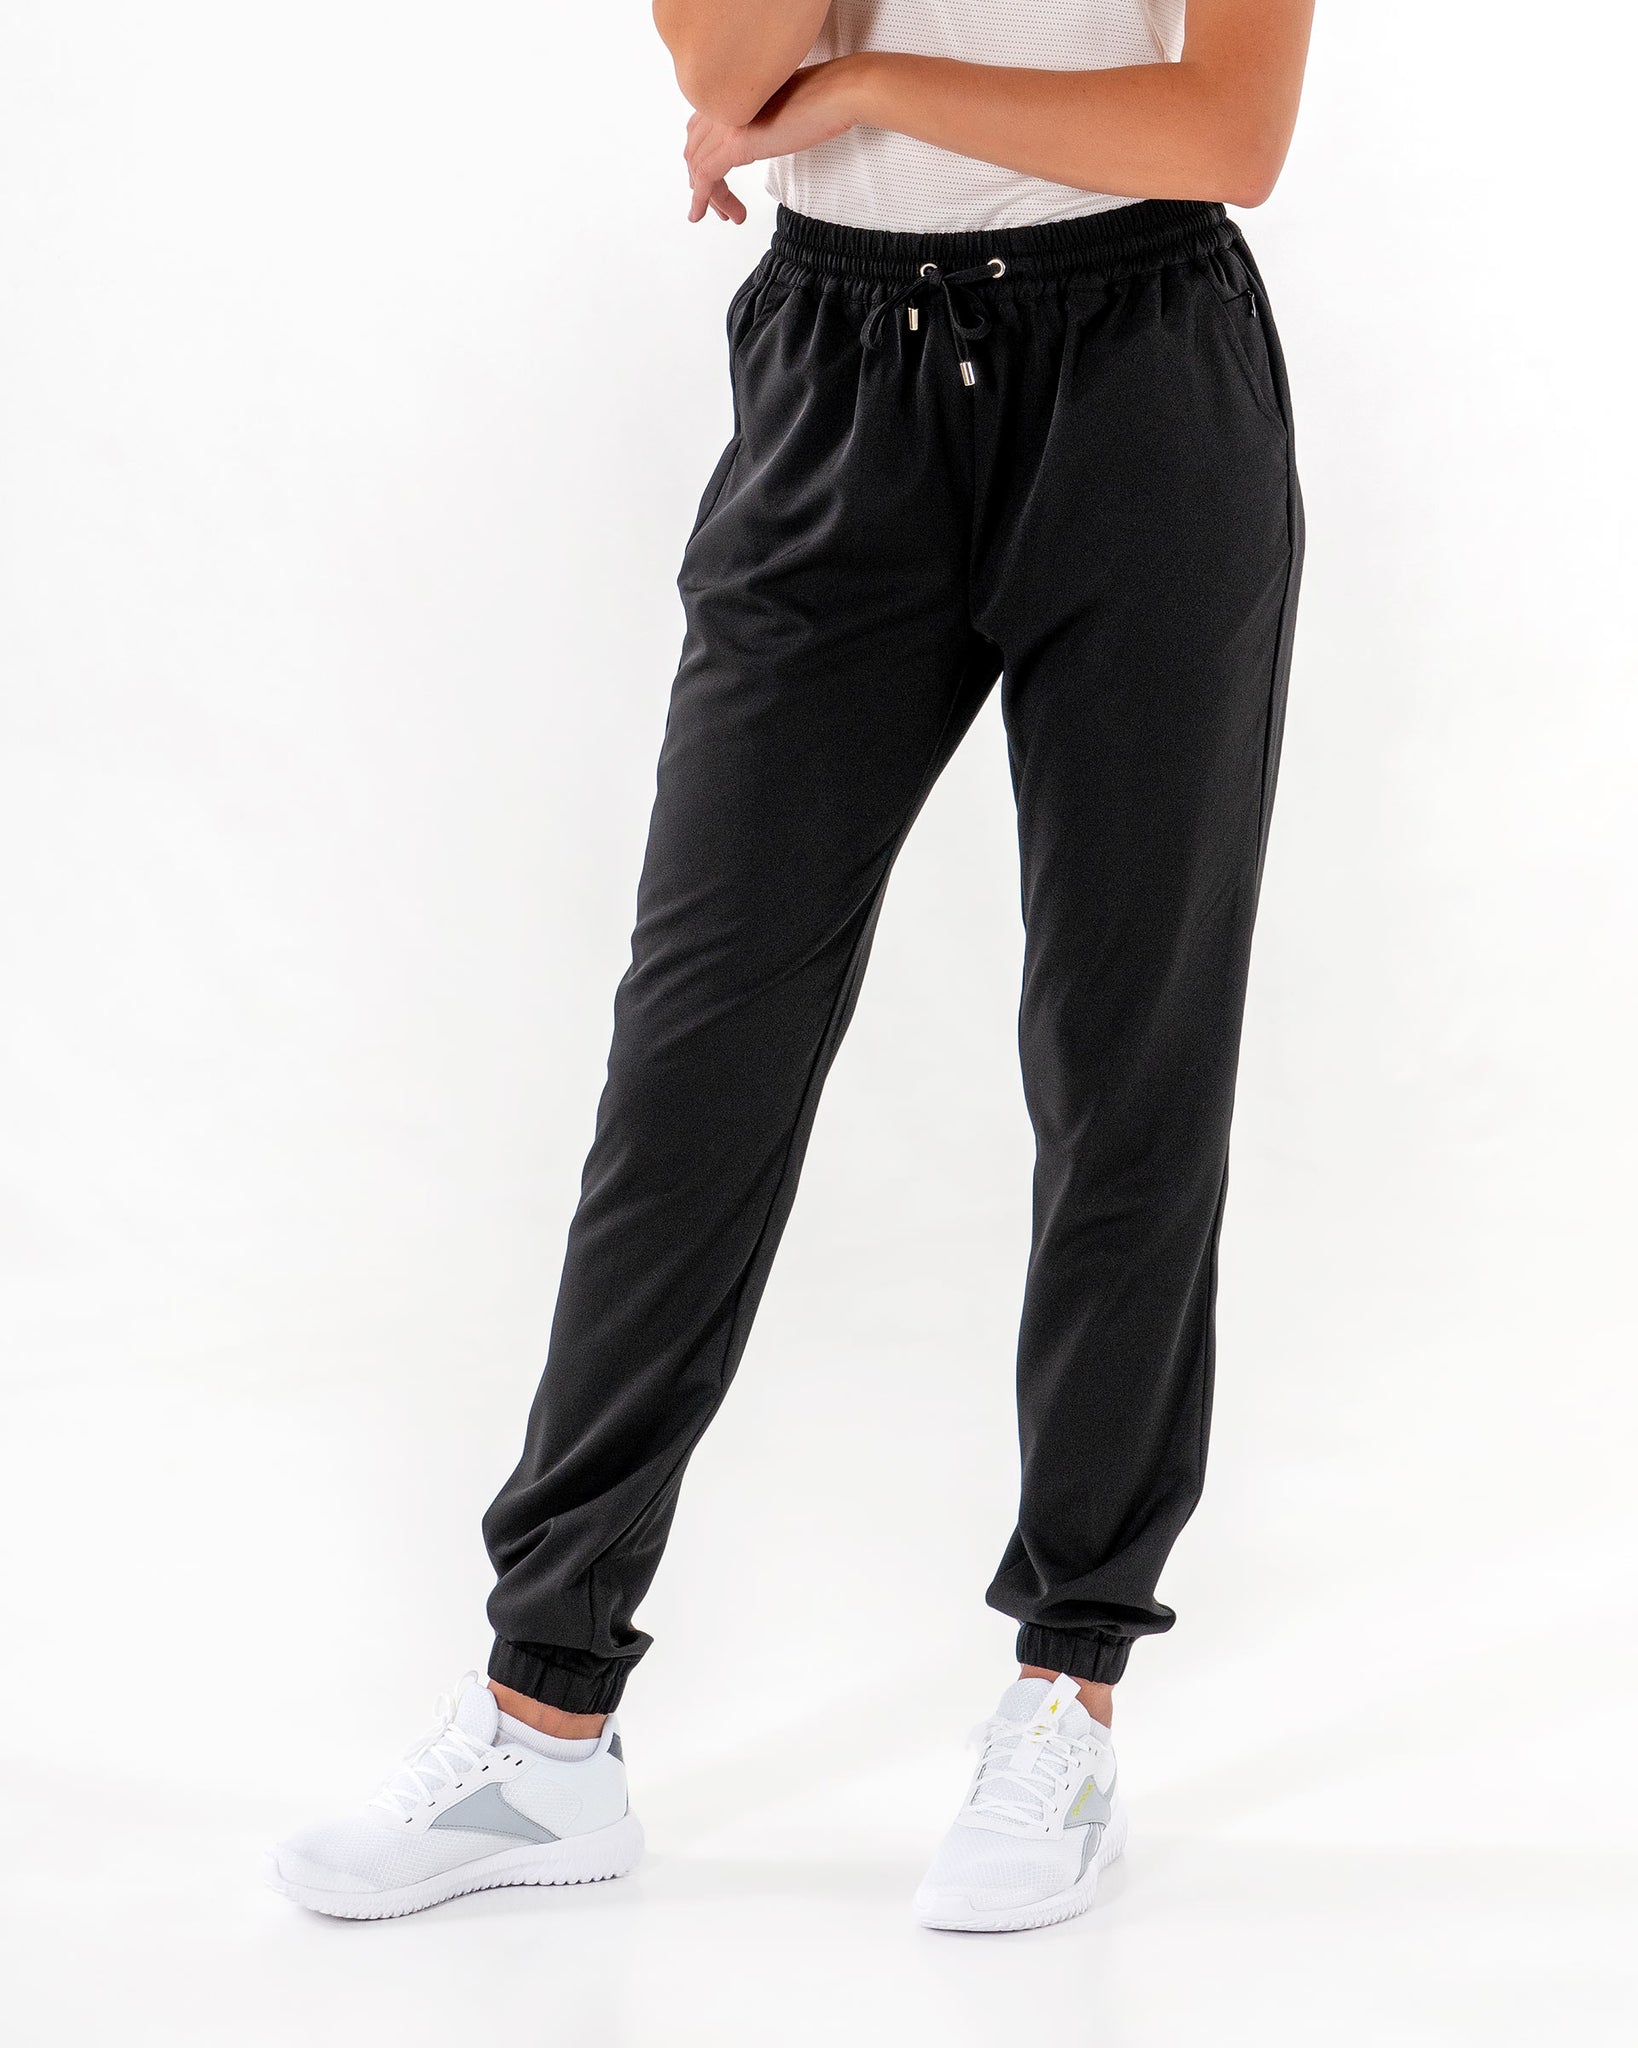 Belgravia Apparel and Safety Jogger: Safe, Stylish and a Seamless Fit -  Belgravia Apparel